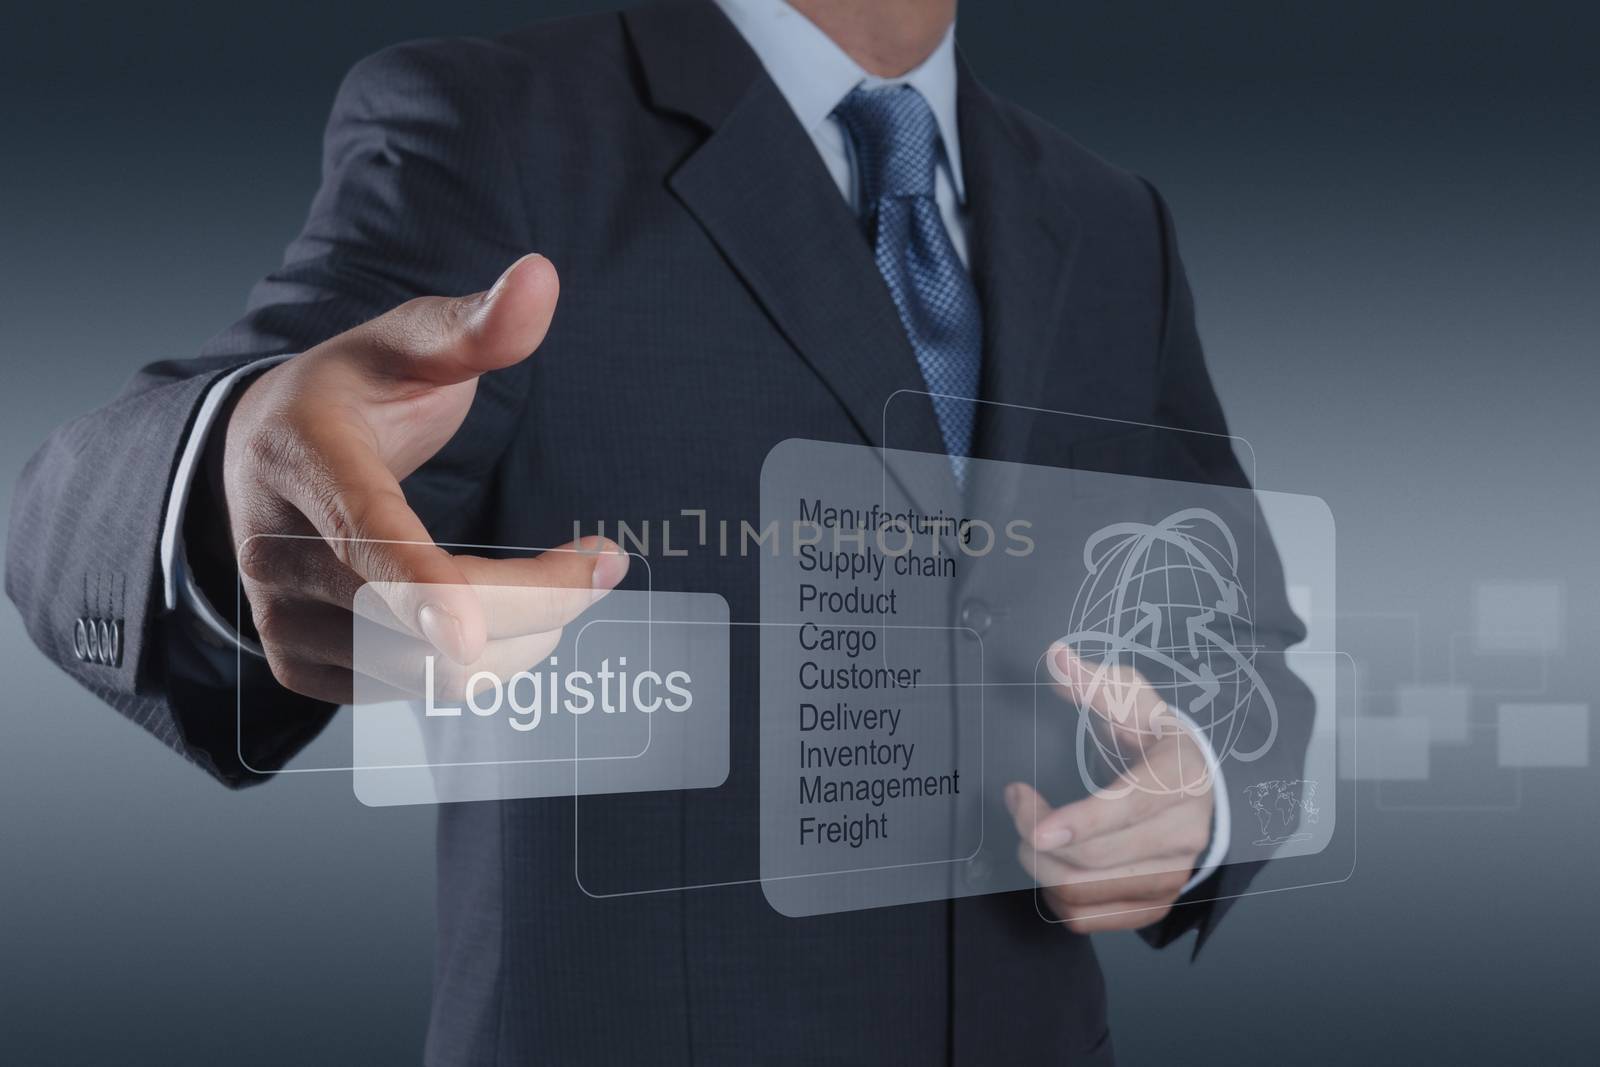 businessman shows logistics diagram as concept by everythingpossible